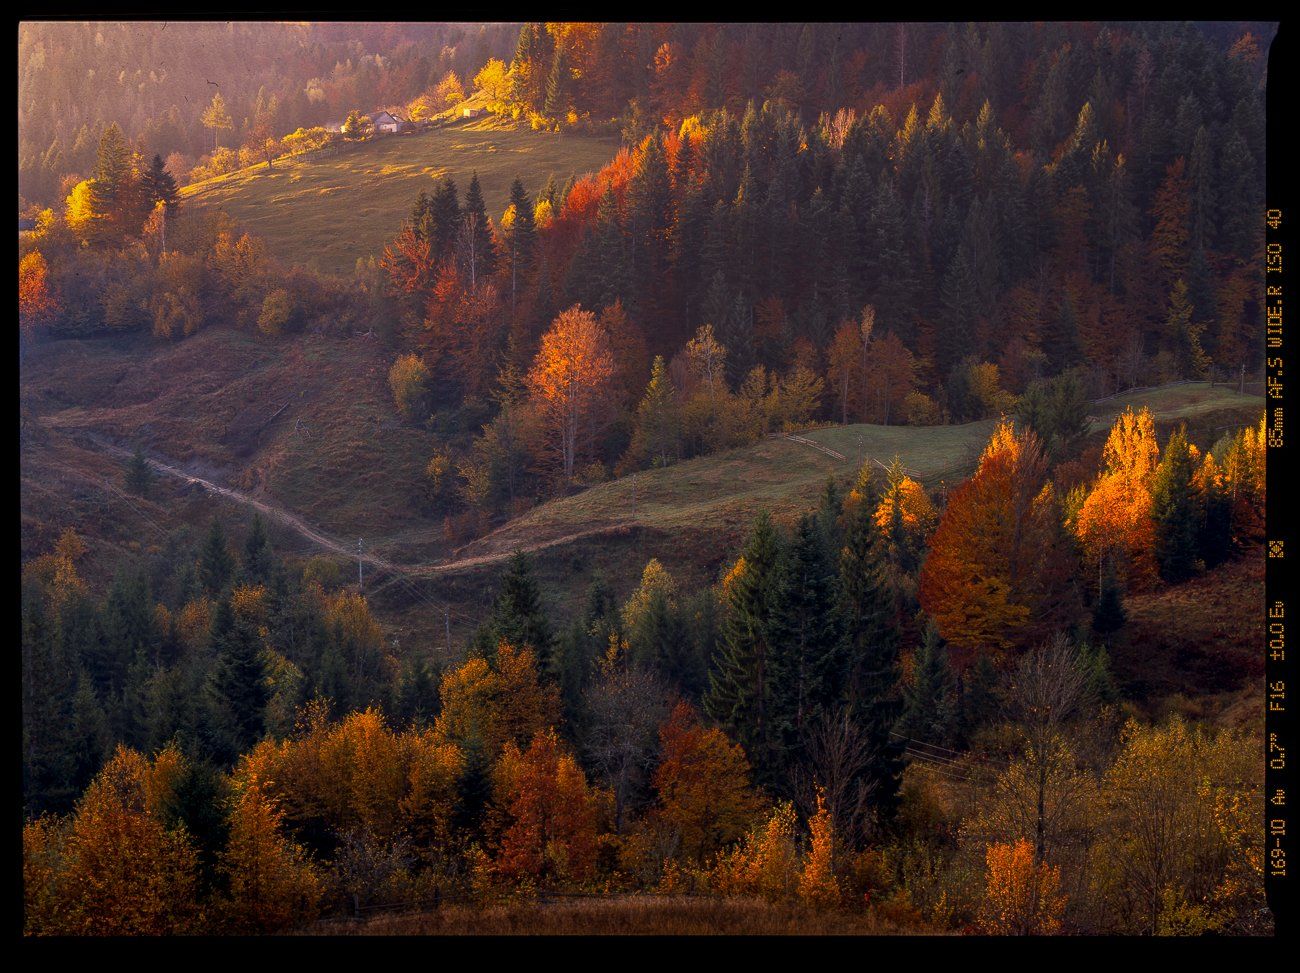 autumn, carpathian, colorful, countryside, fall, field, foliage, forest, hill, house, land, landscape, meadow, morning, mountain, mountains, nature, outdoor, pasture, picturesque, red, rural, scenery, season, tranquil, travel, tree, view, wood, yellow, Арсений Герасименко